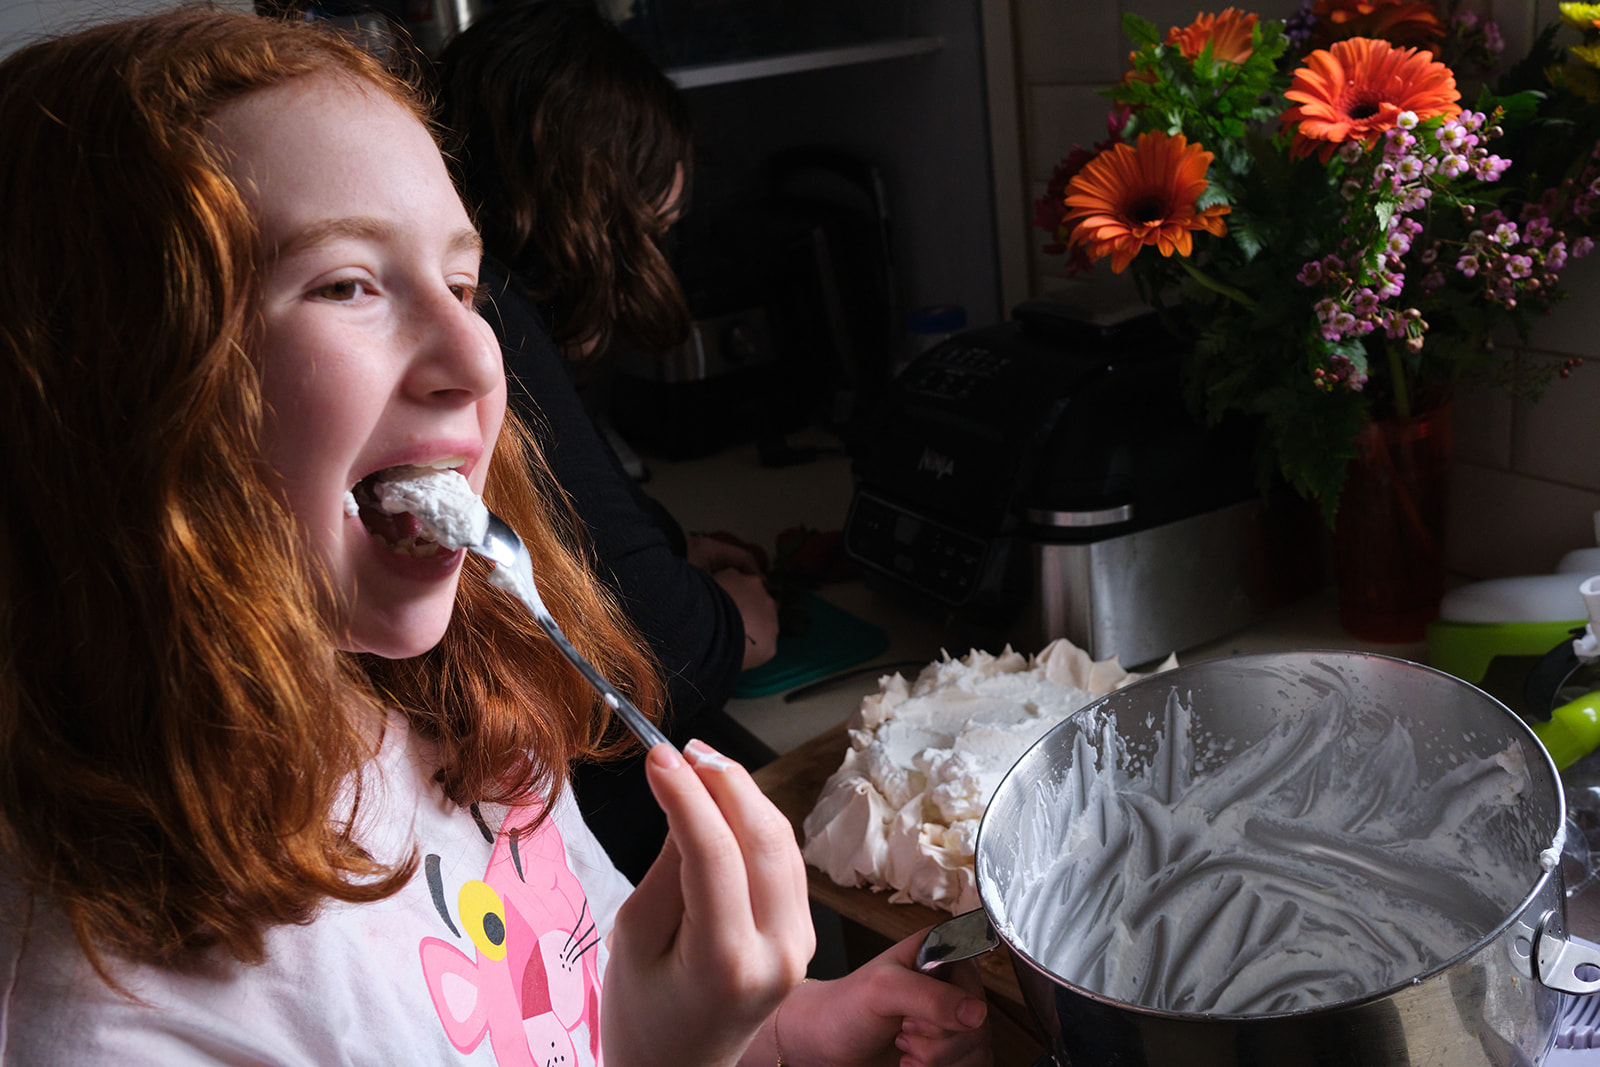 a girl licking cake batter off a spoon in the kitchen with flowers